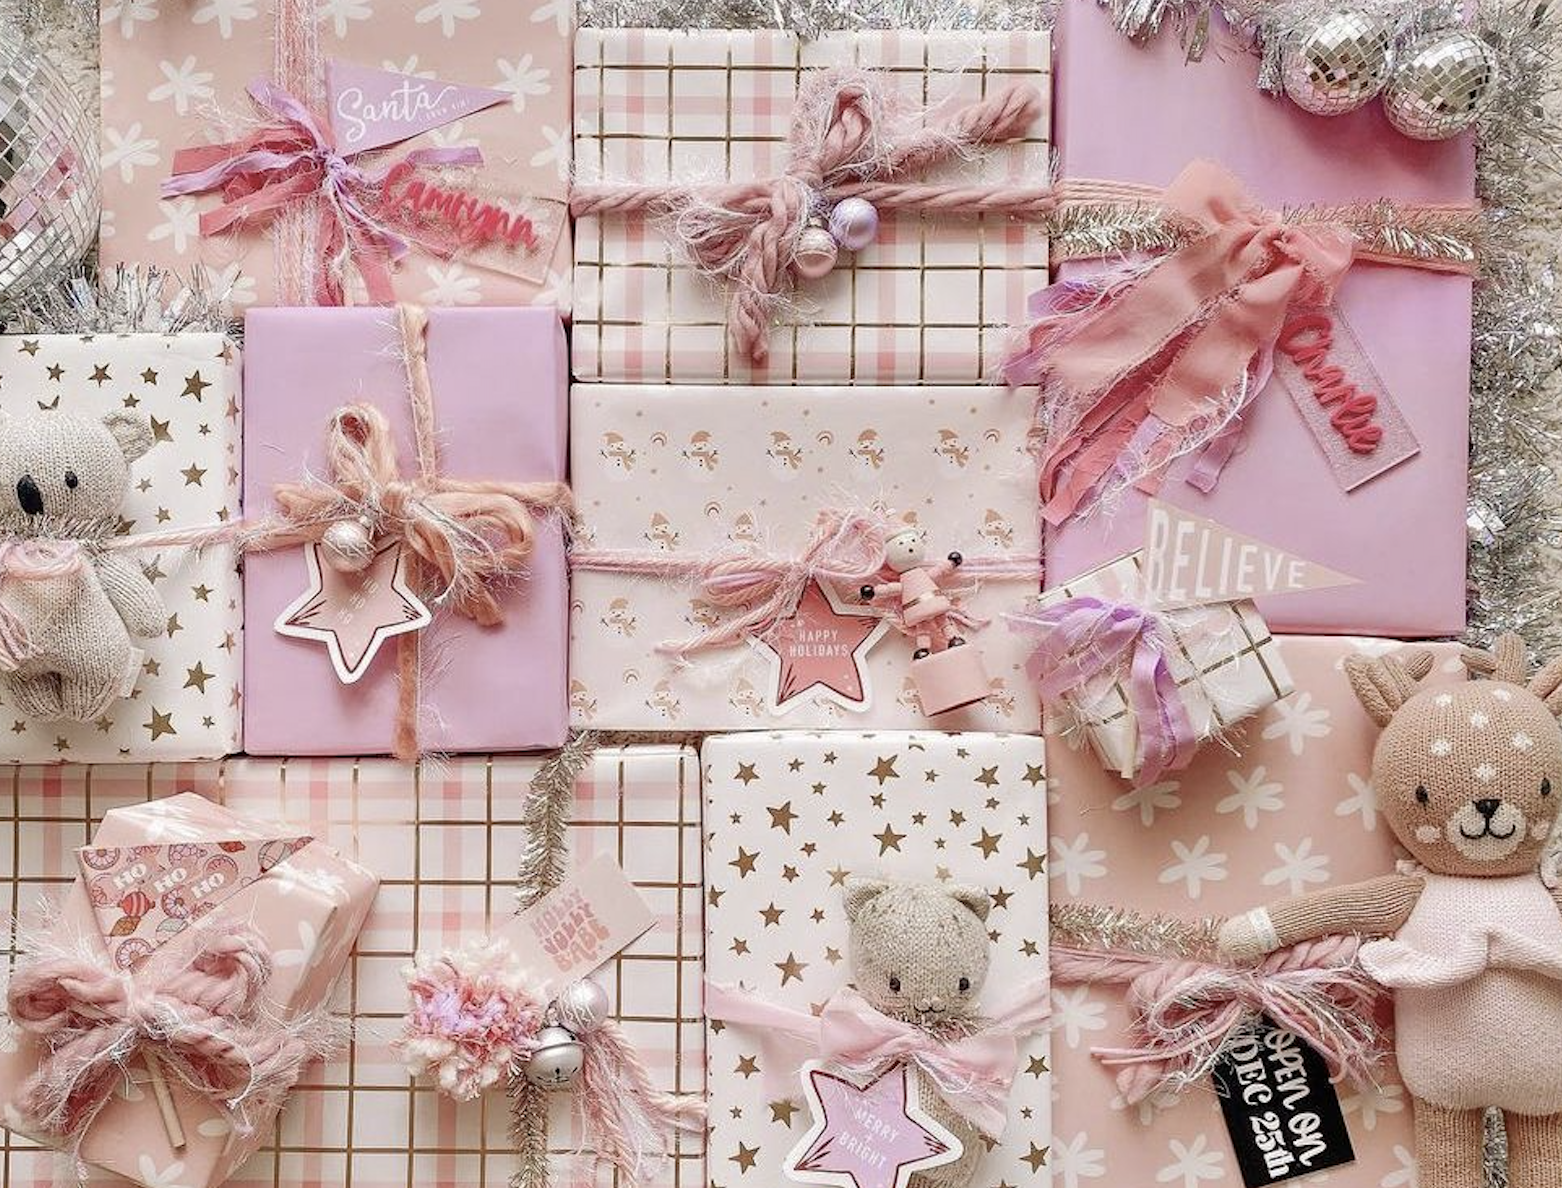 best friend gift ideas with pink presents